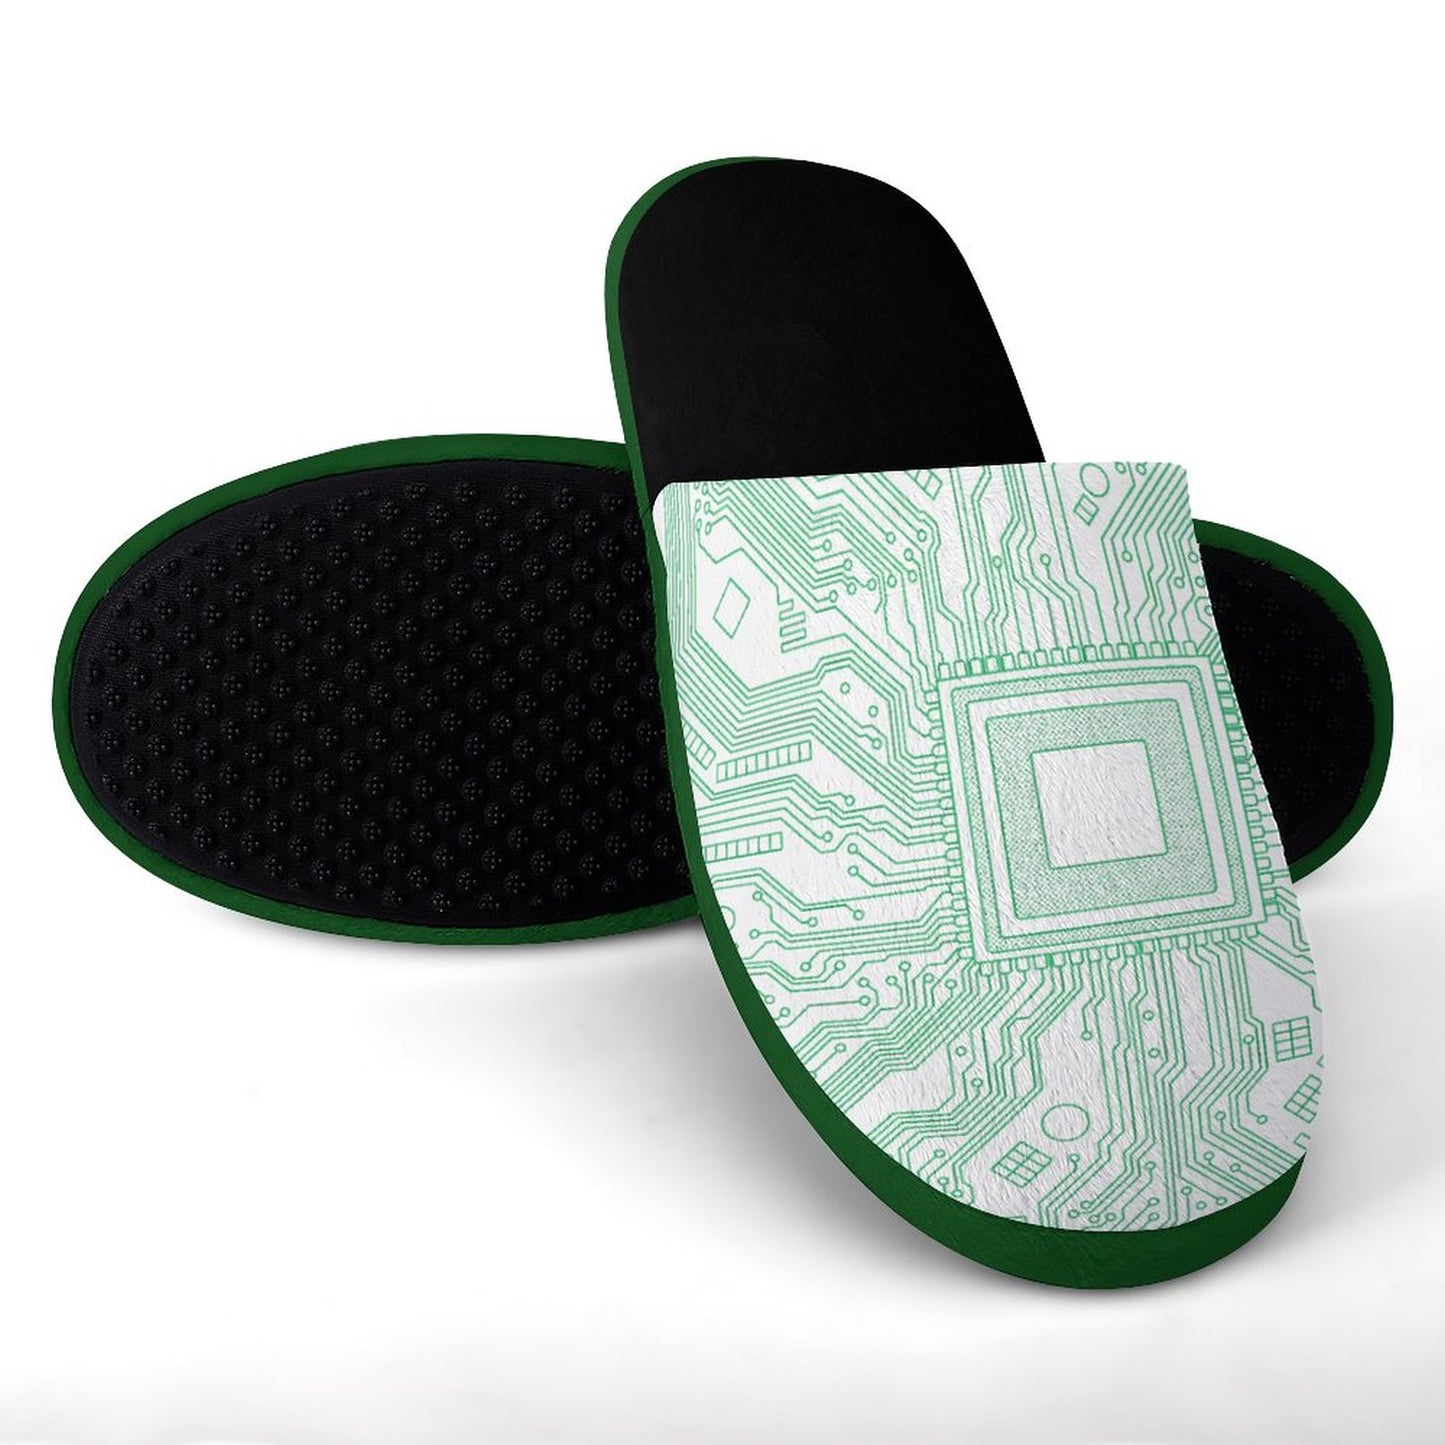 Personalize Your Own Cotton Slippers-Men and Women's Sizes